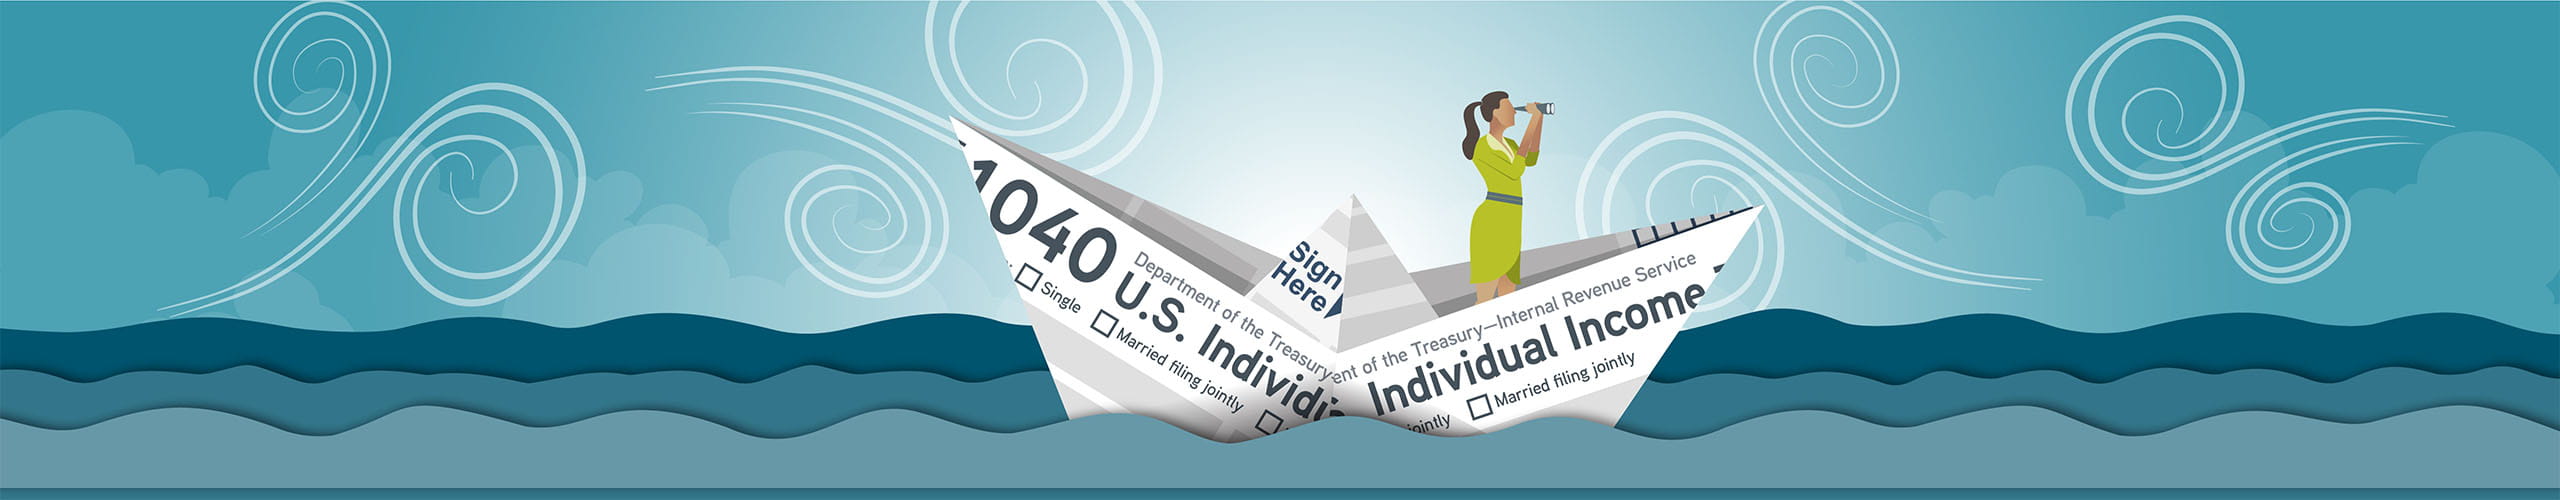 2022 Tax Outlook promo banner